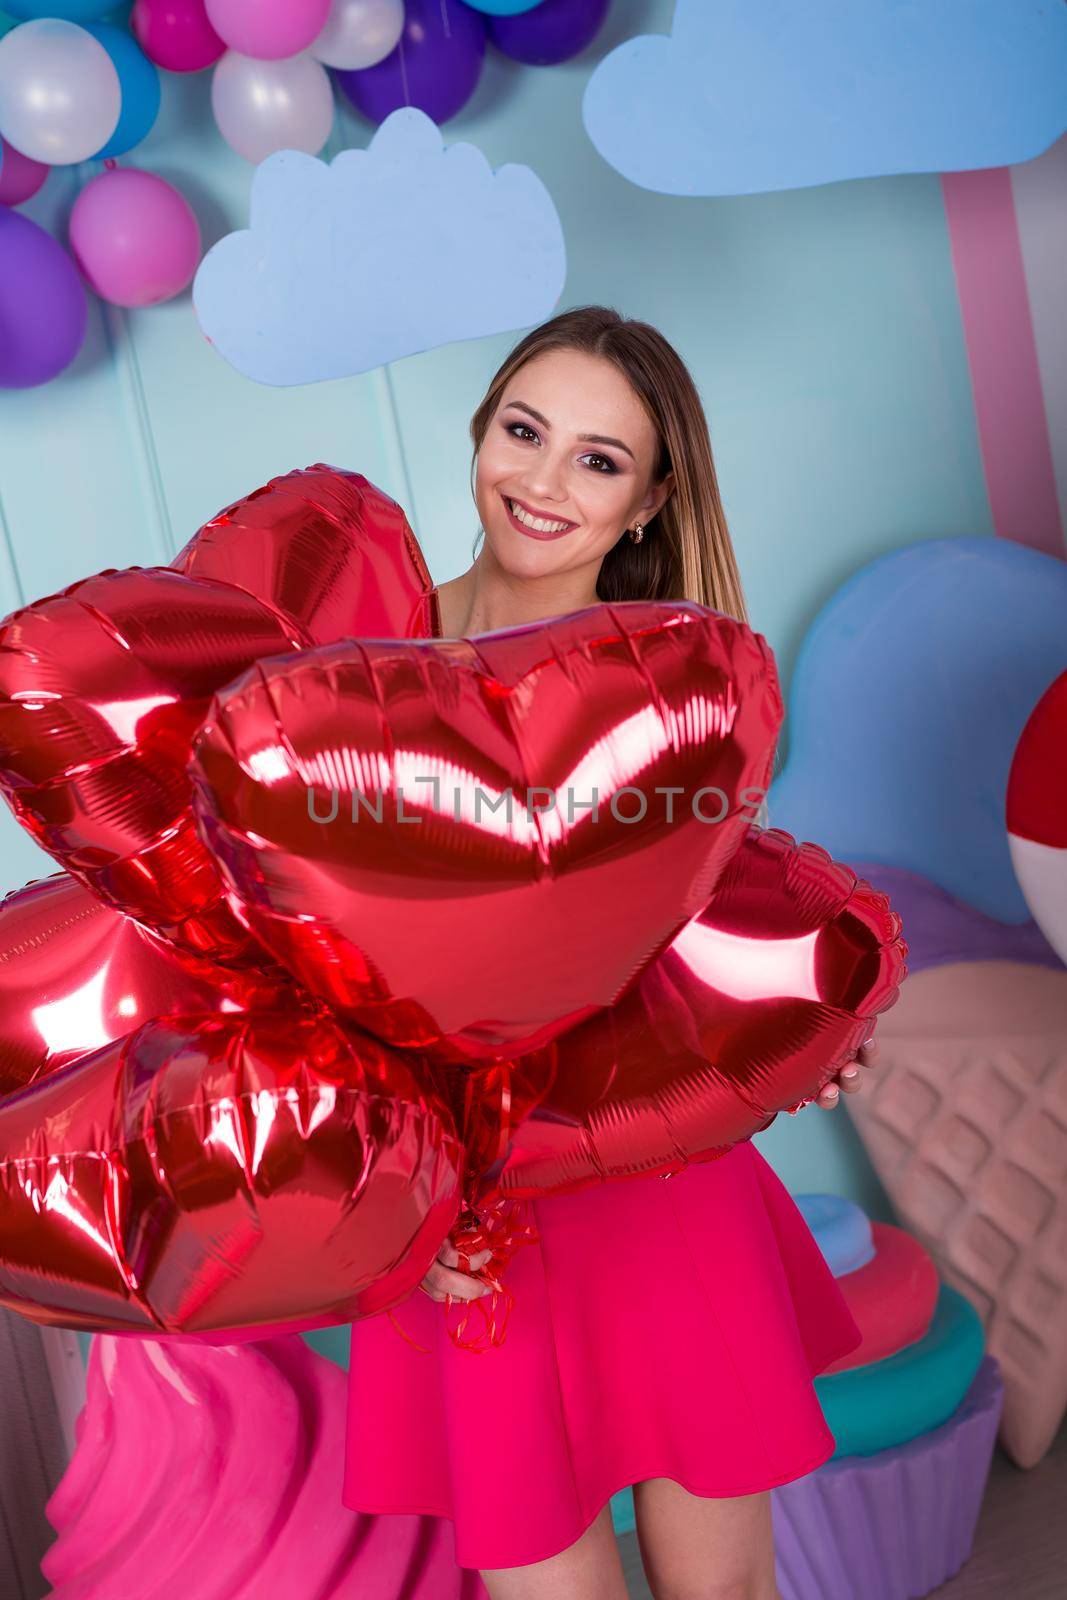 Fashion portrait of young woman in pink dress with an air balloons, candy on a colorful background by StudioPeace